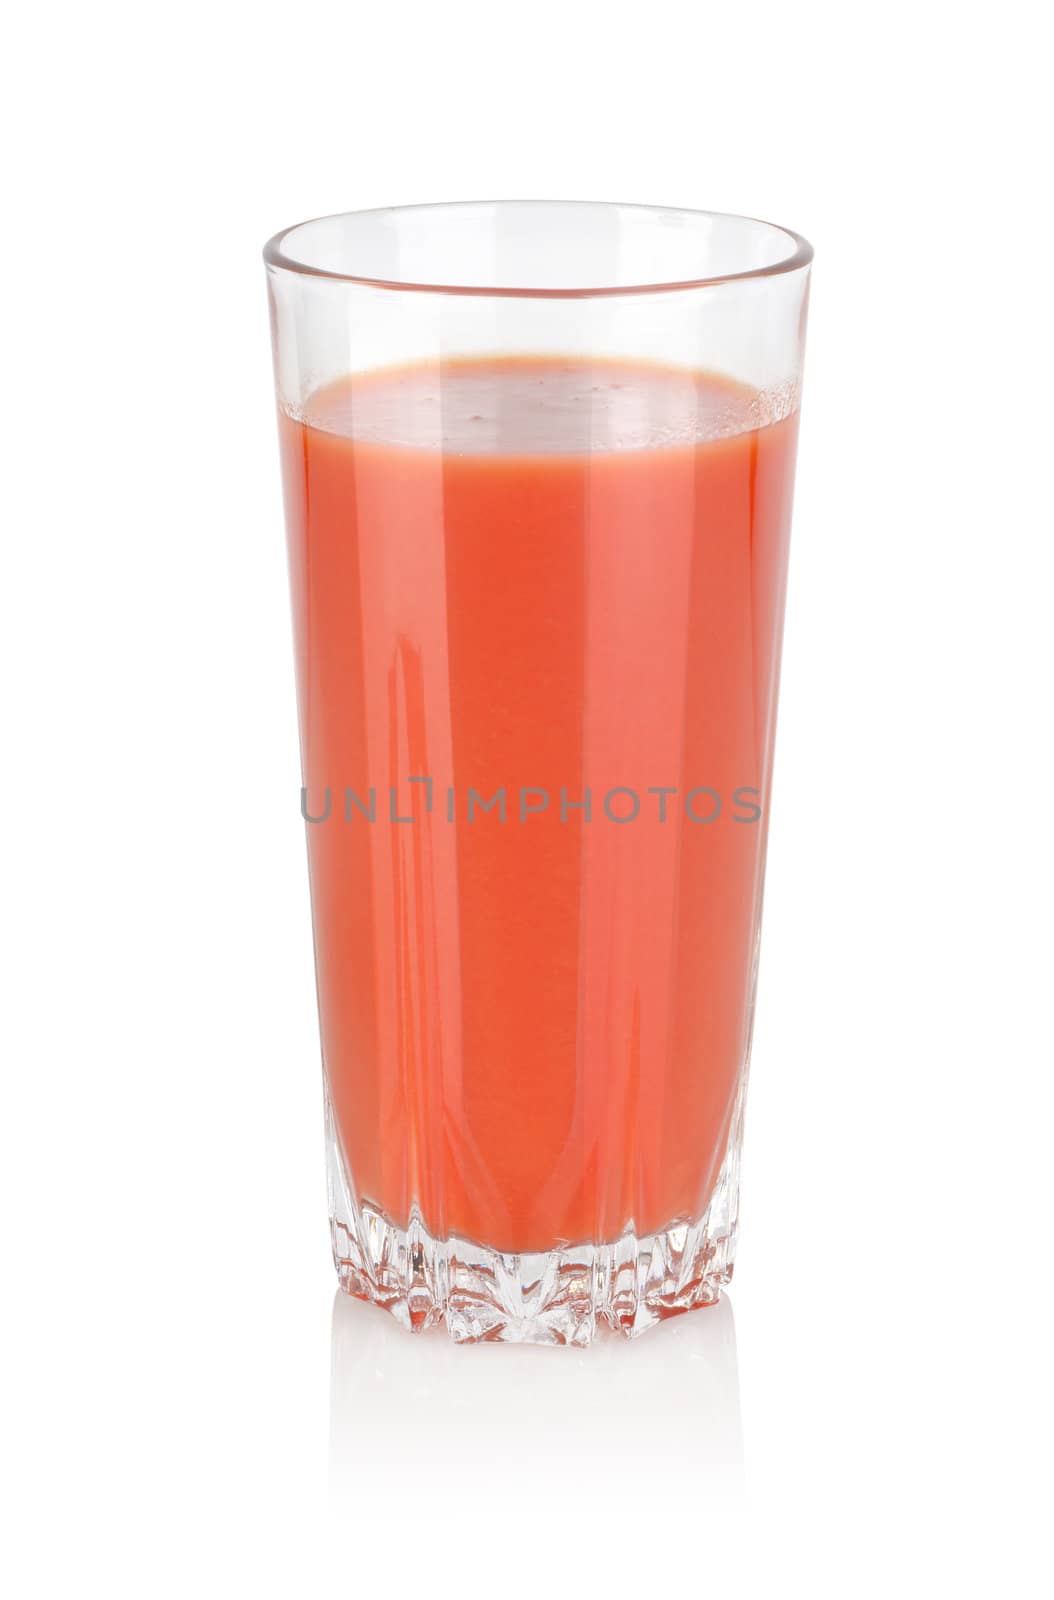 Glass of tomato juice by Givaga